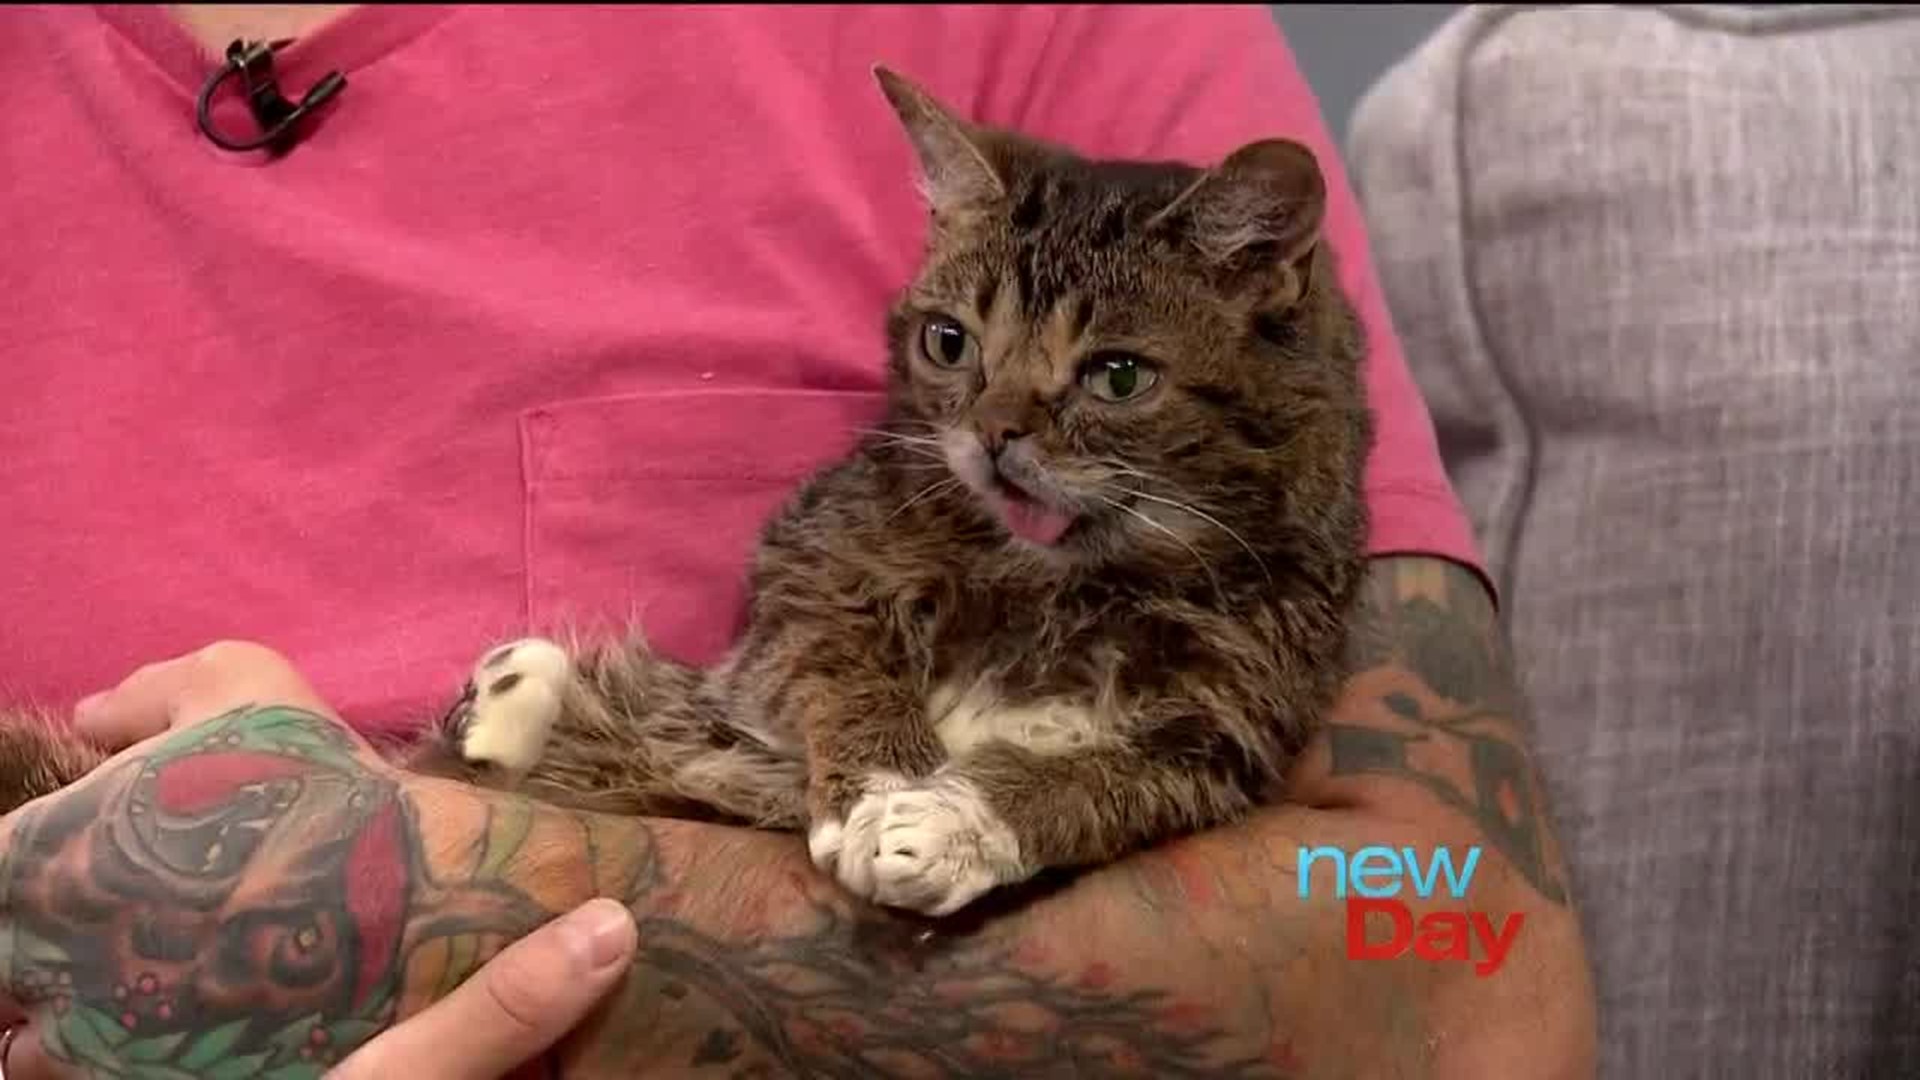 Internet cat celebrity Lil Bub has died, according to her owner Mike  Bridavsky. Lil Bub's "dude" posted tribute to the lovable cat on her official Instagram account.